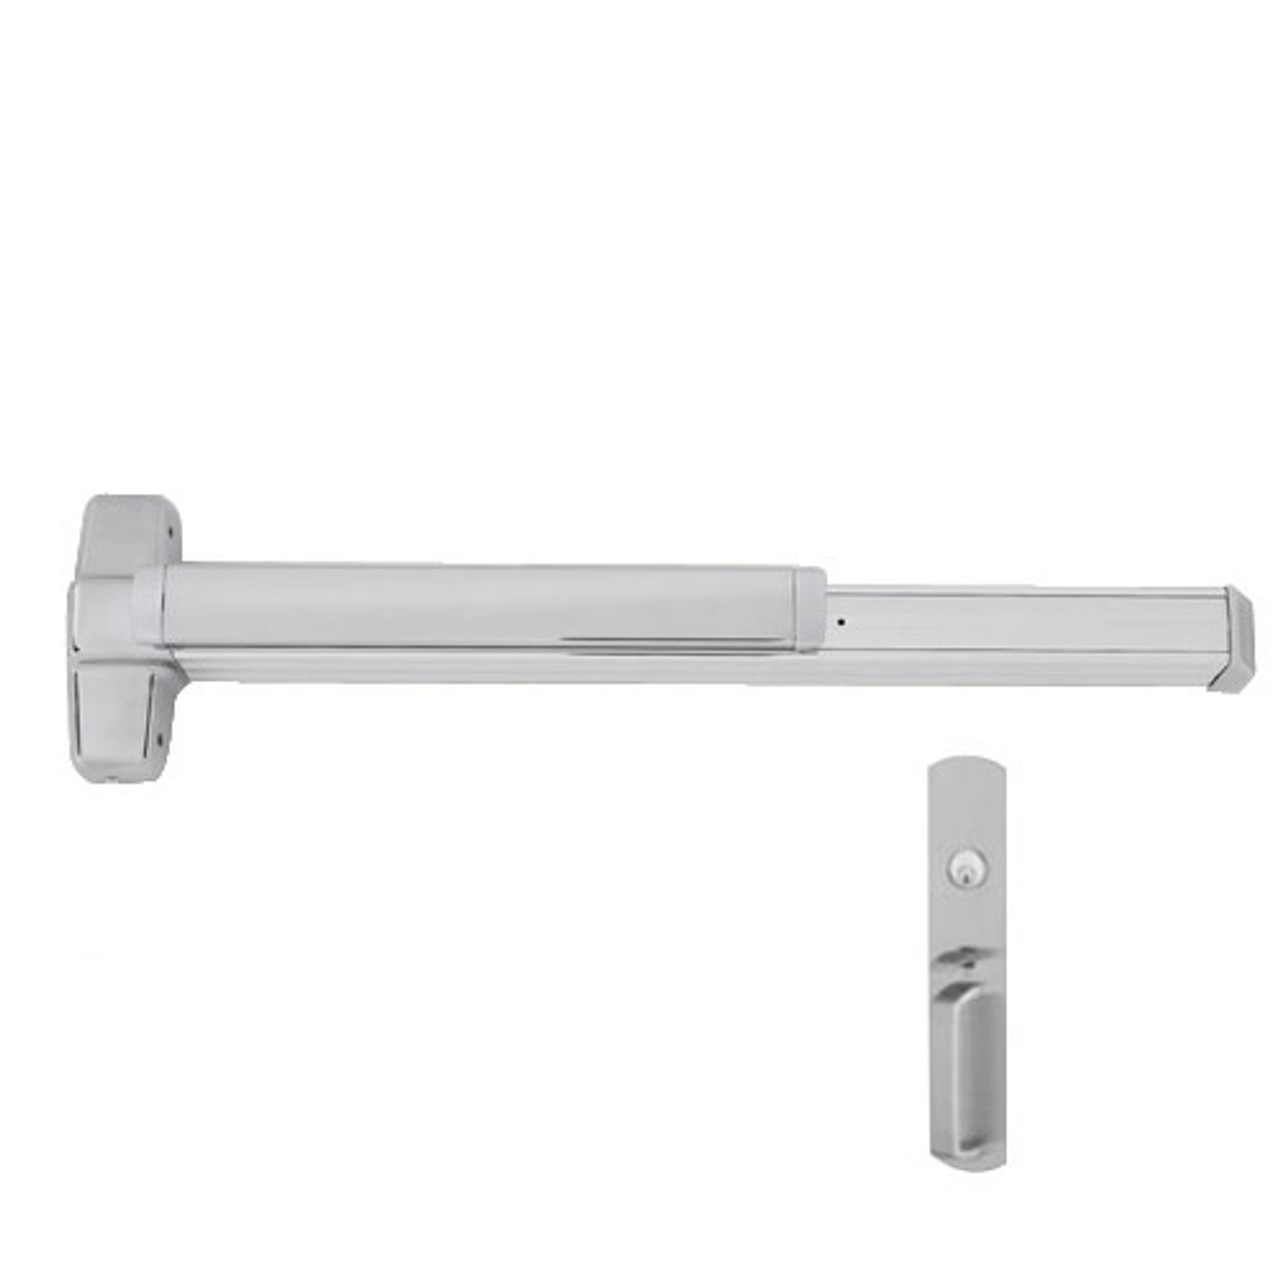 QEL-9850WDC-TP-US32D-3 Von Duprin Exit Device in Satin Stainless